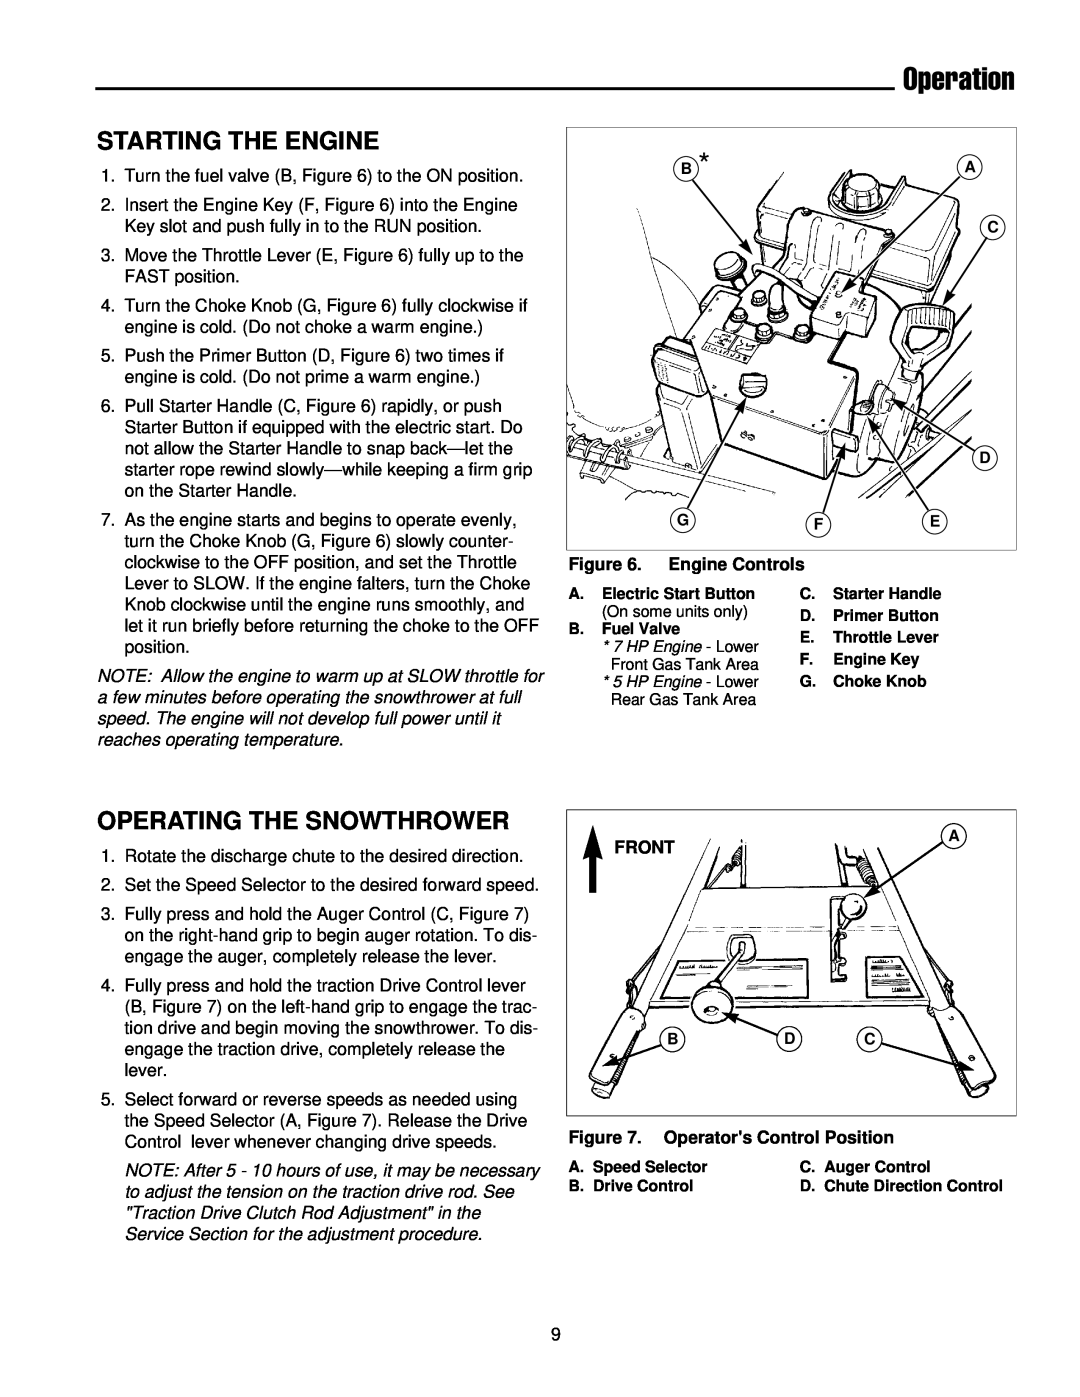 Simplicity 1693425 555M, 1693426 755E Starting The Engine, Operating The Snowthrower, Operation, Engine Controls, Front 